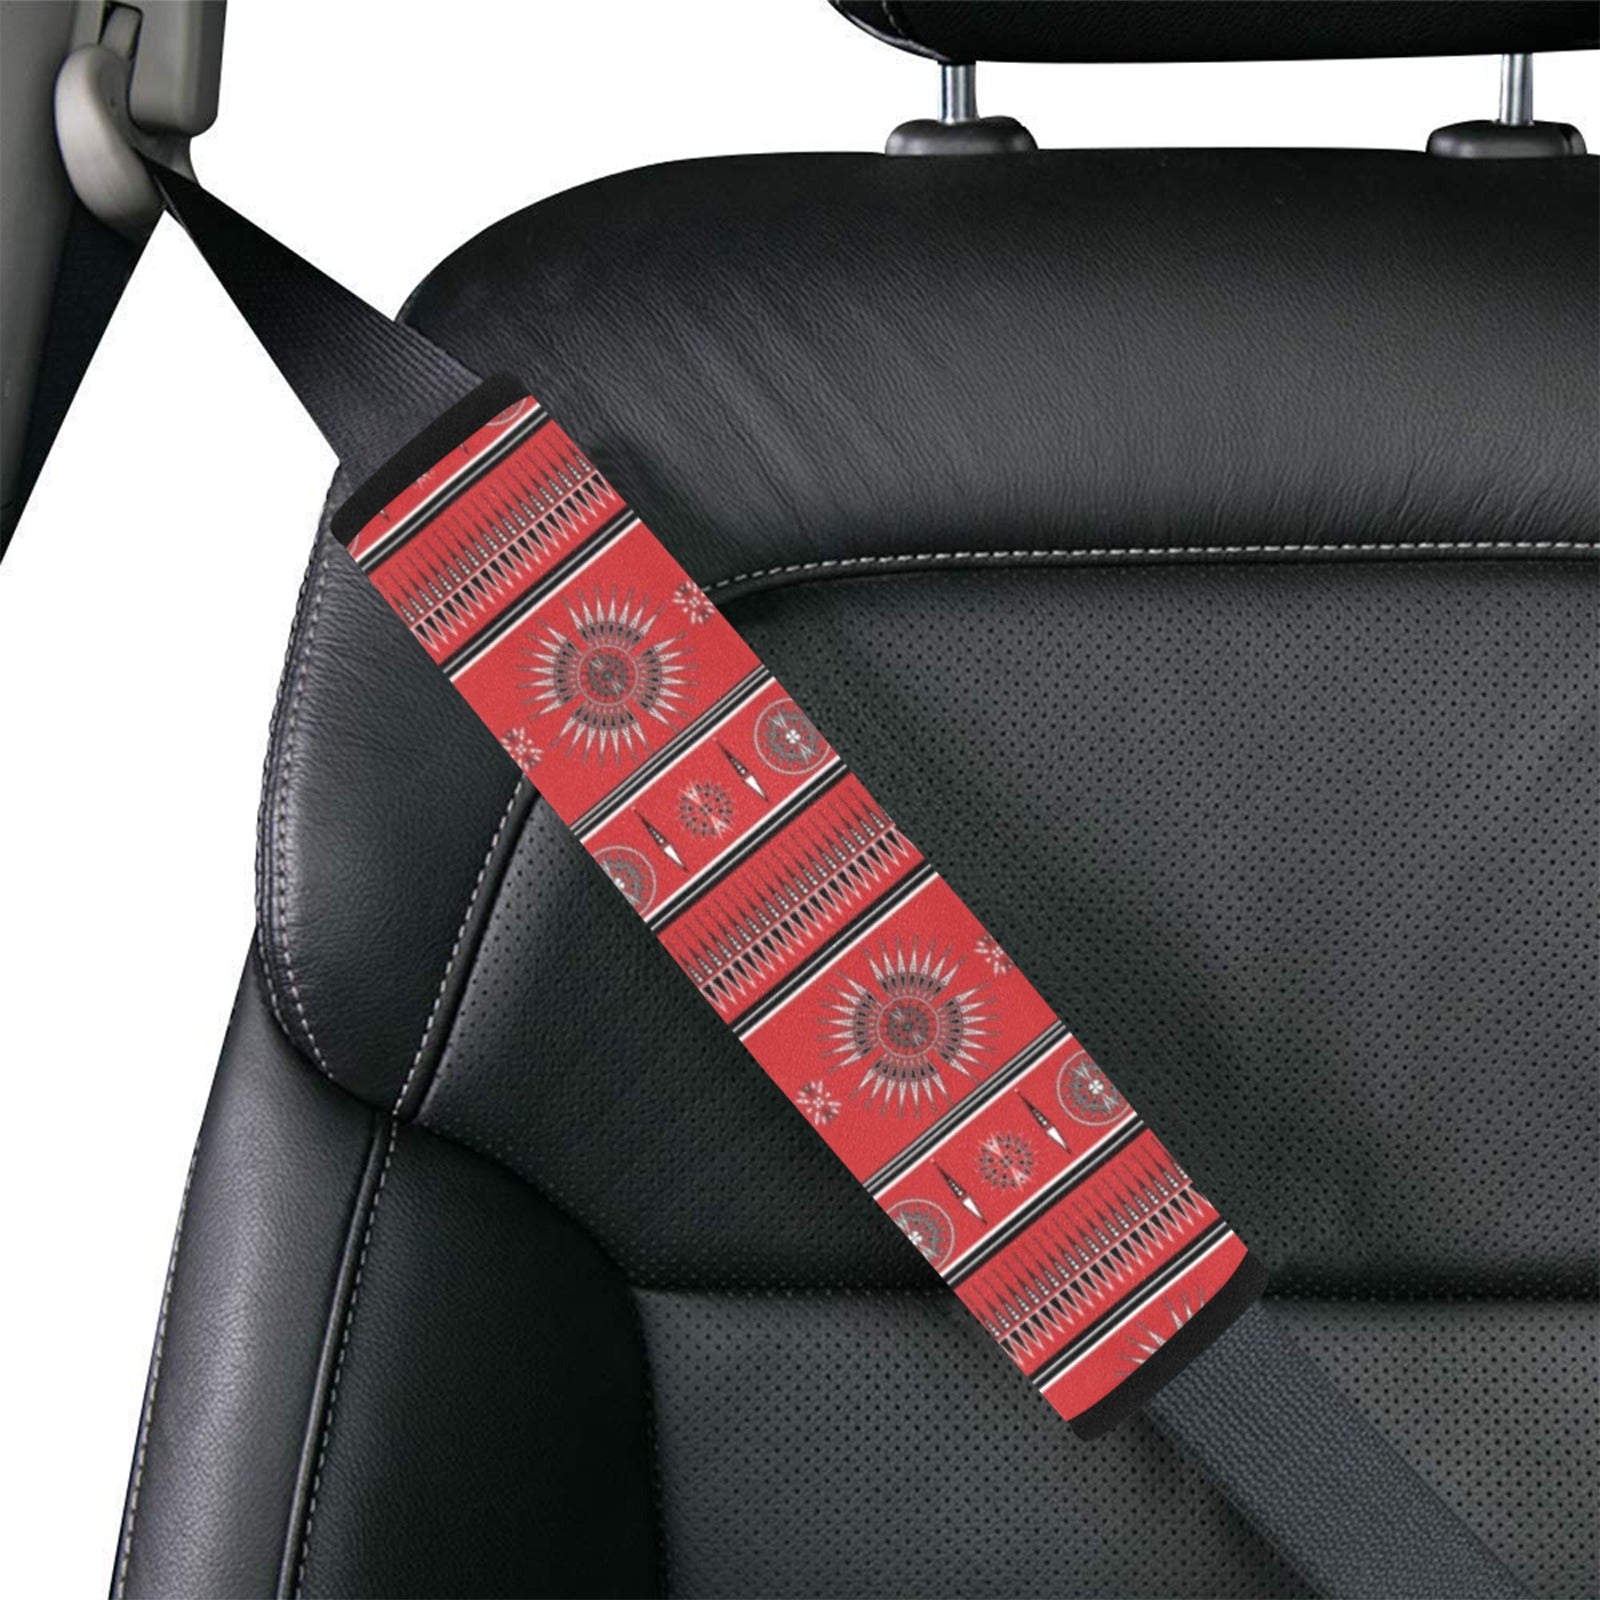 Evening Feather Wheel Blush Car Seat Belt Cover 7''x12.6'' (Pack of 2)